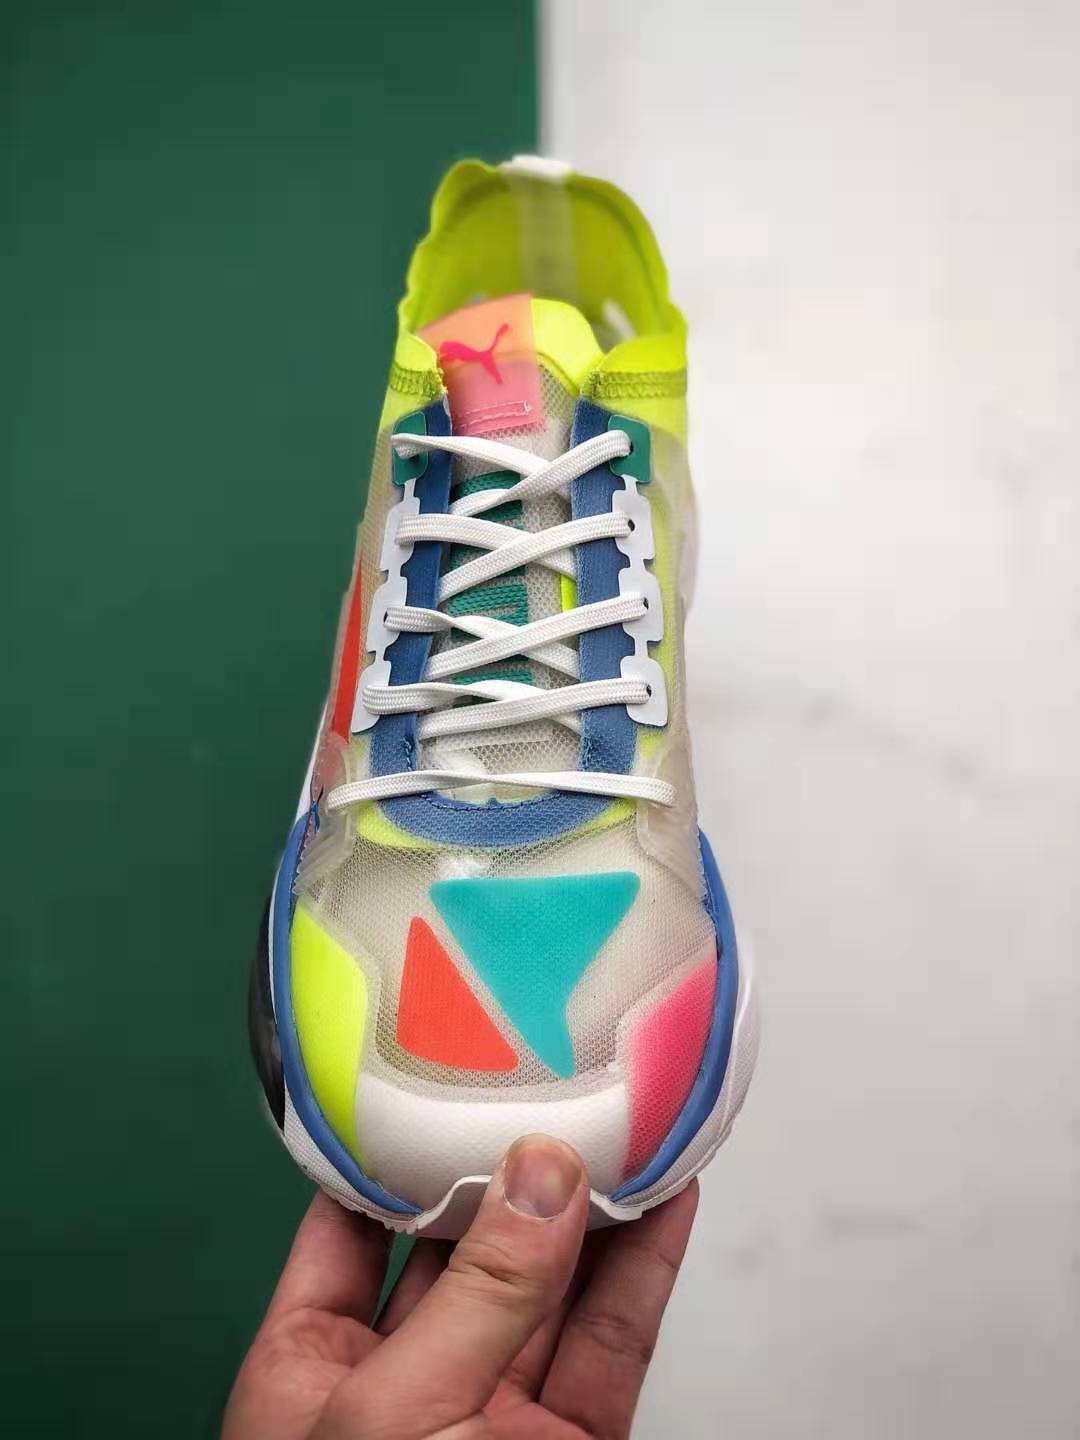 Puma LQDCELL Optic Sheer Multicolor 192560-01: Stylish and Versatile Athletic Sneakers